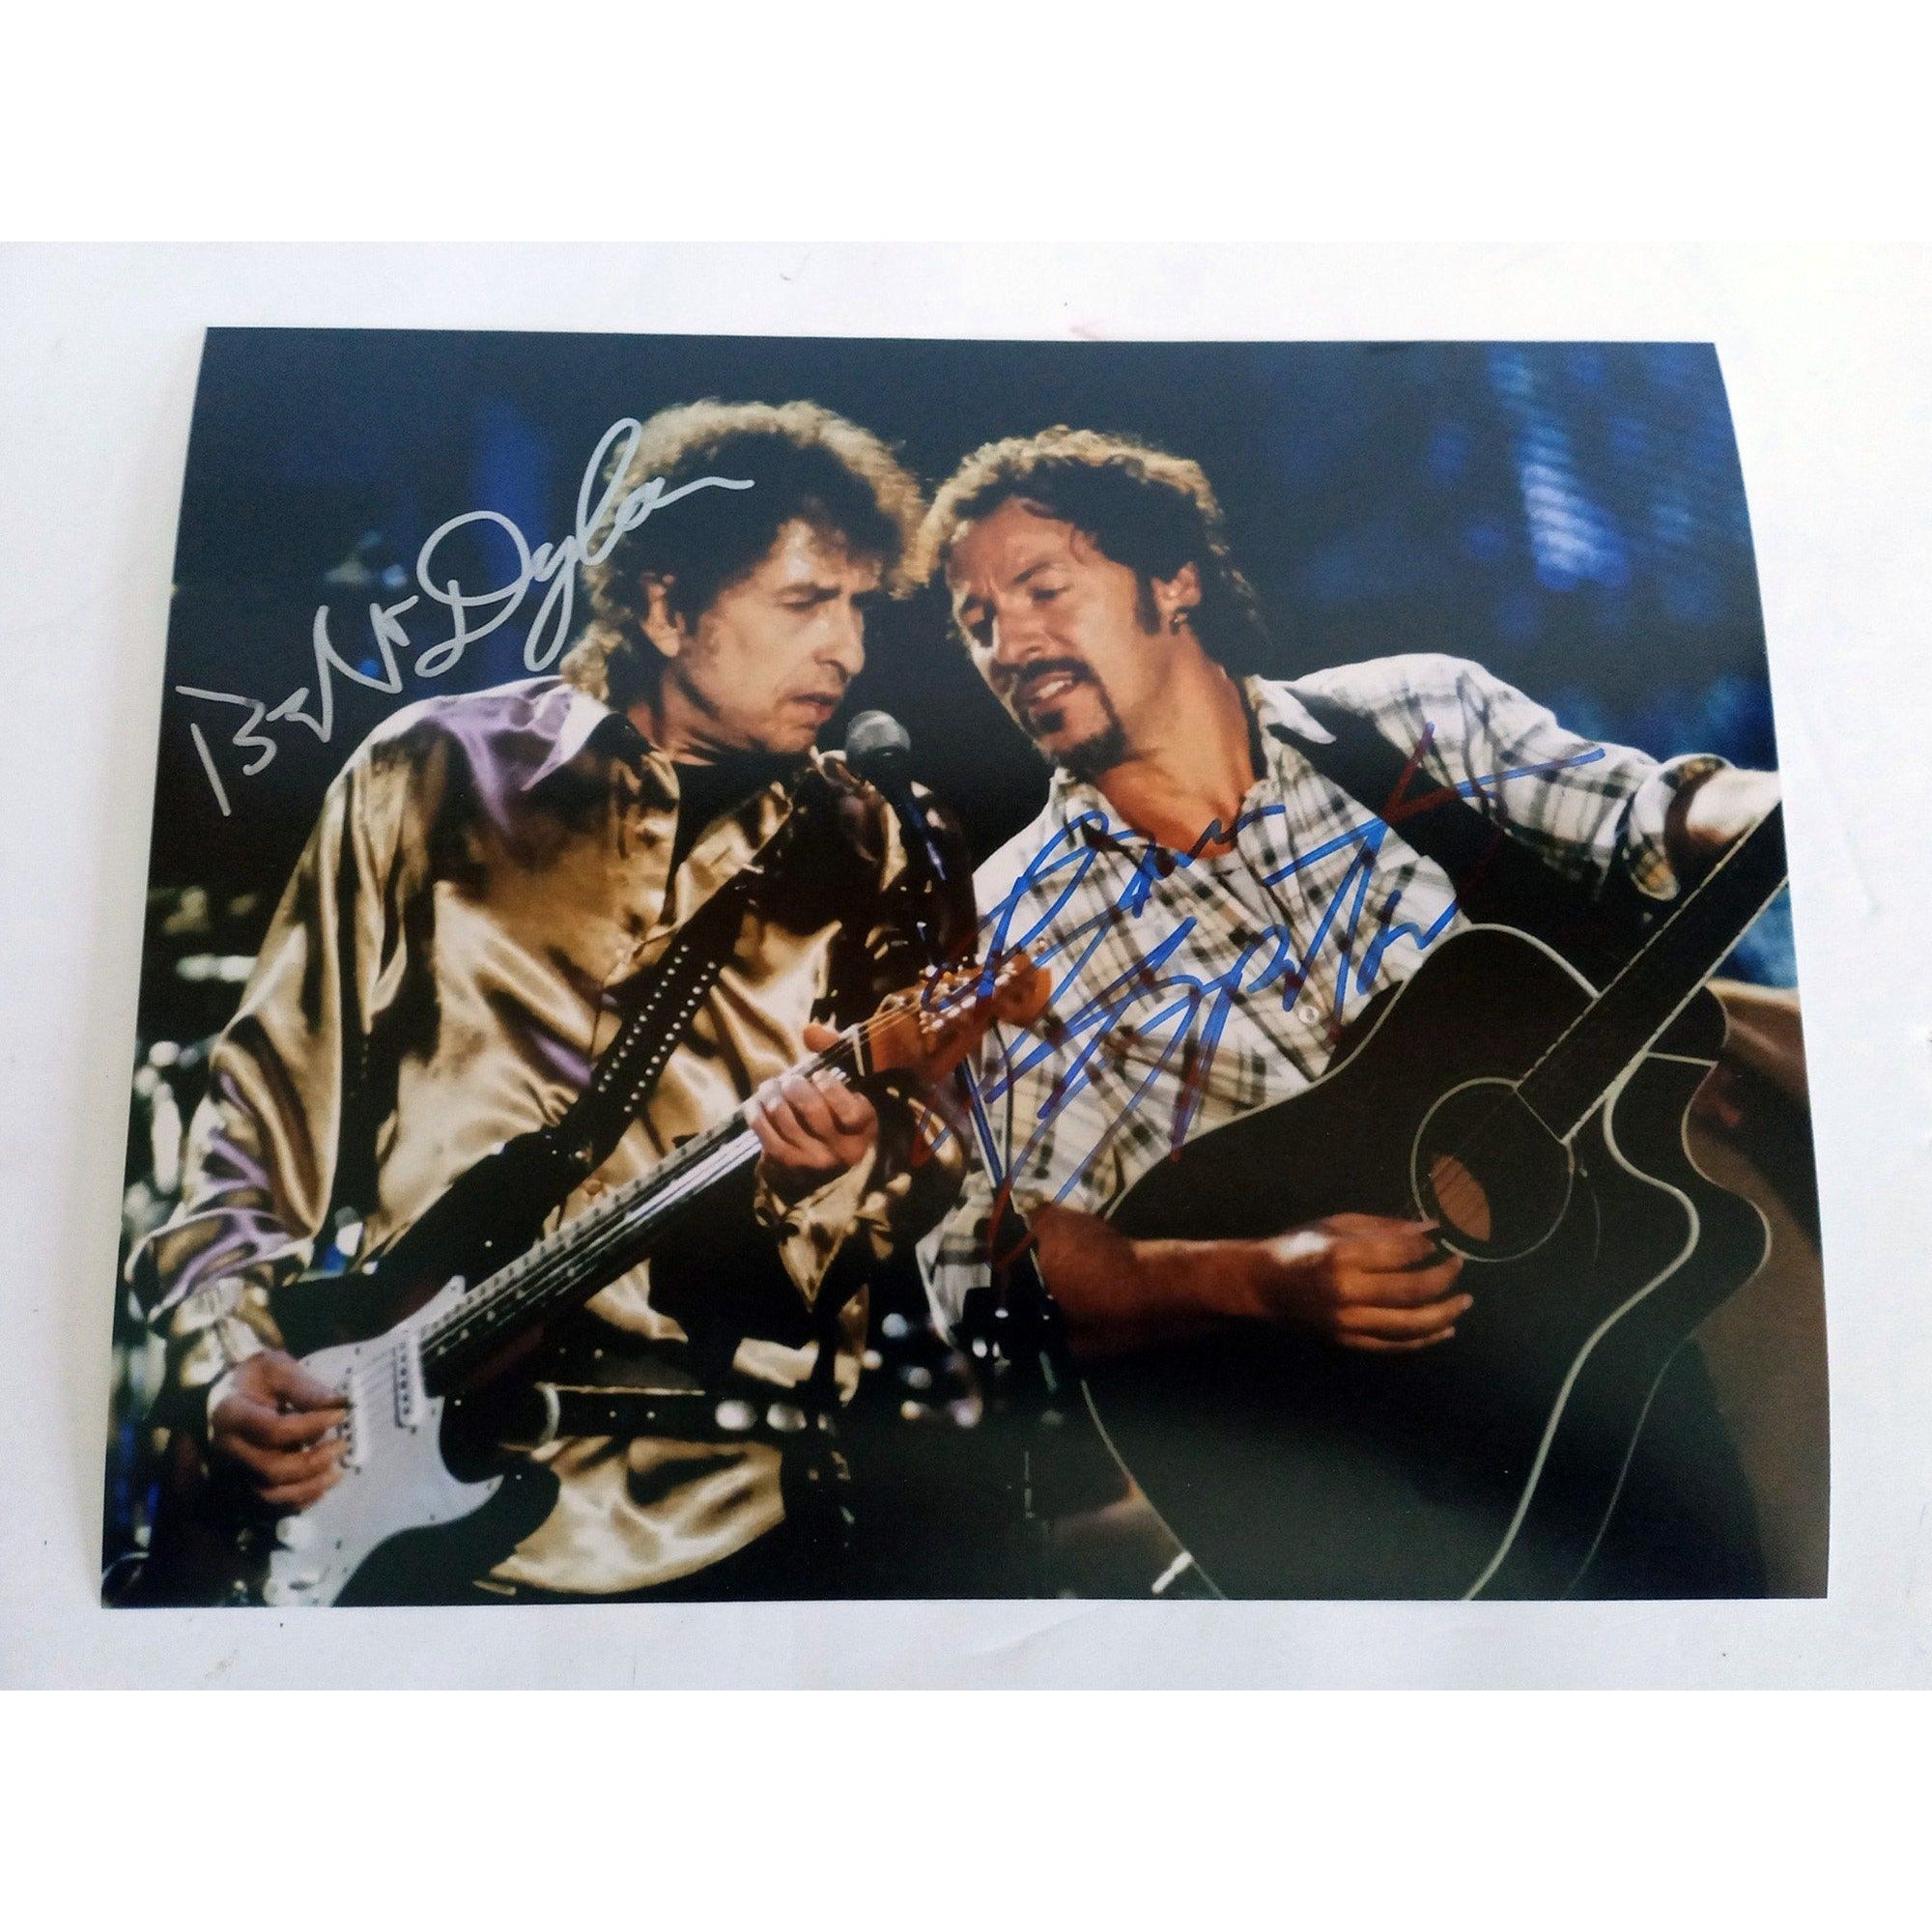 Bruce Springsteen and Bob Dylan 8 by 10 signed photo with proof